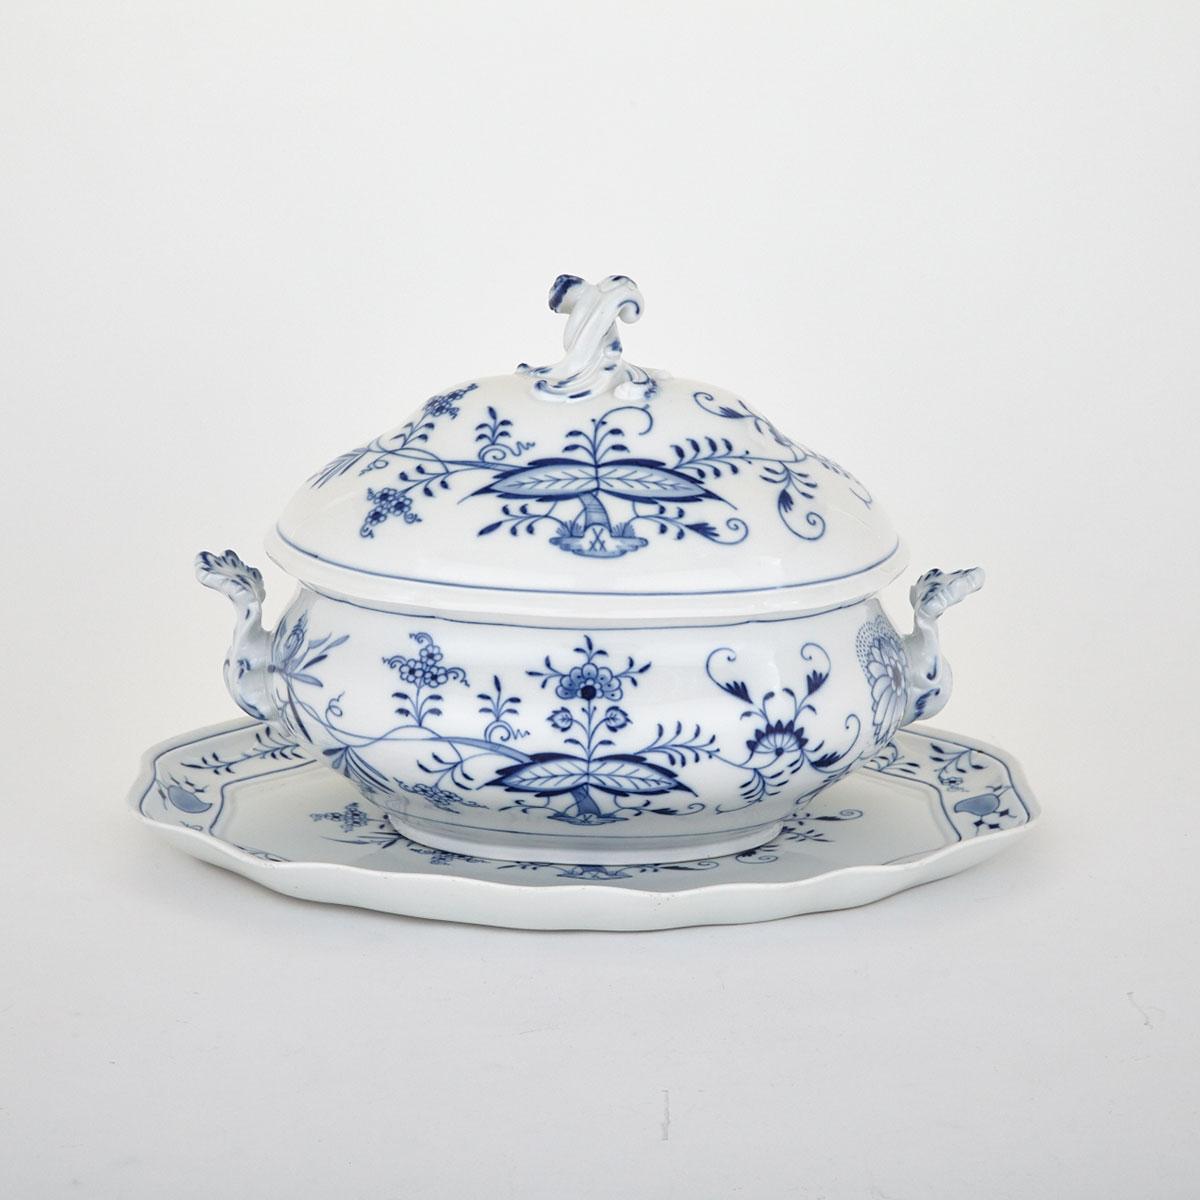 Meissen Blue Onion Pattern Oval Soup Tureen with Cover and Stand, late 19th century